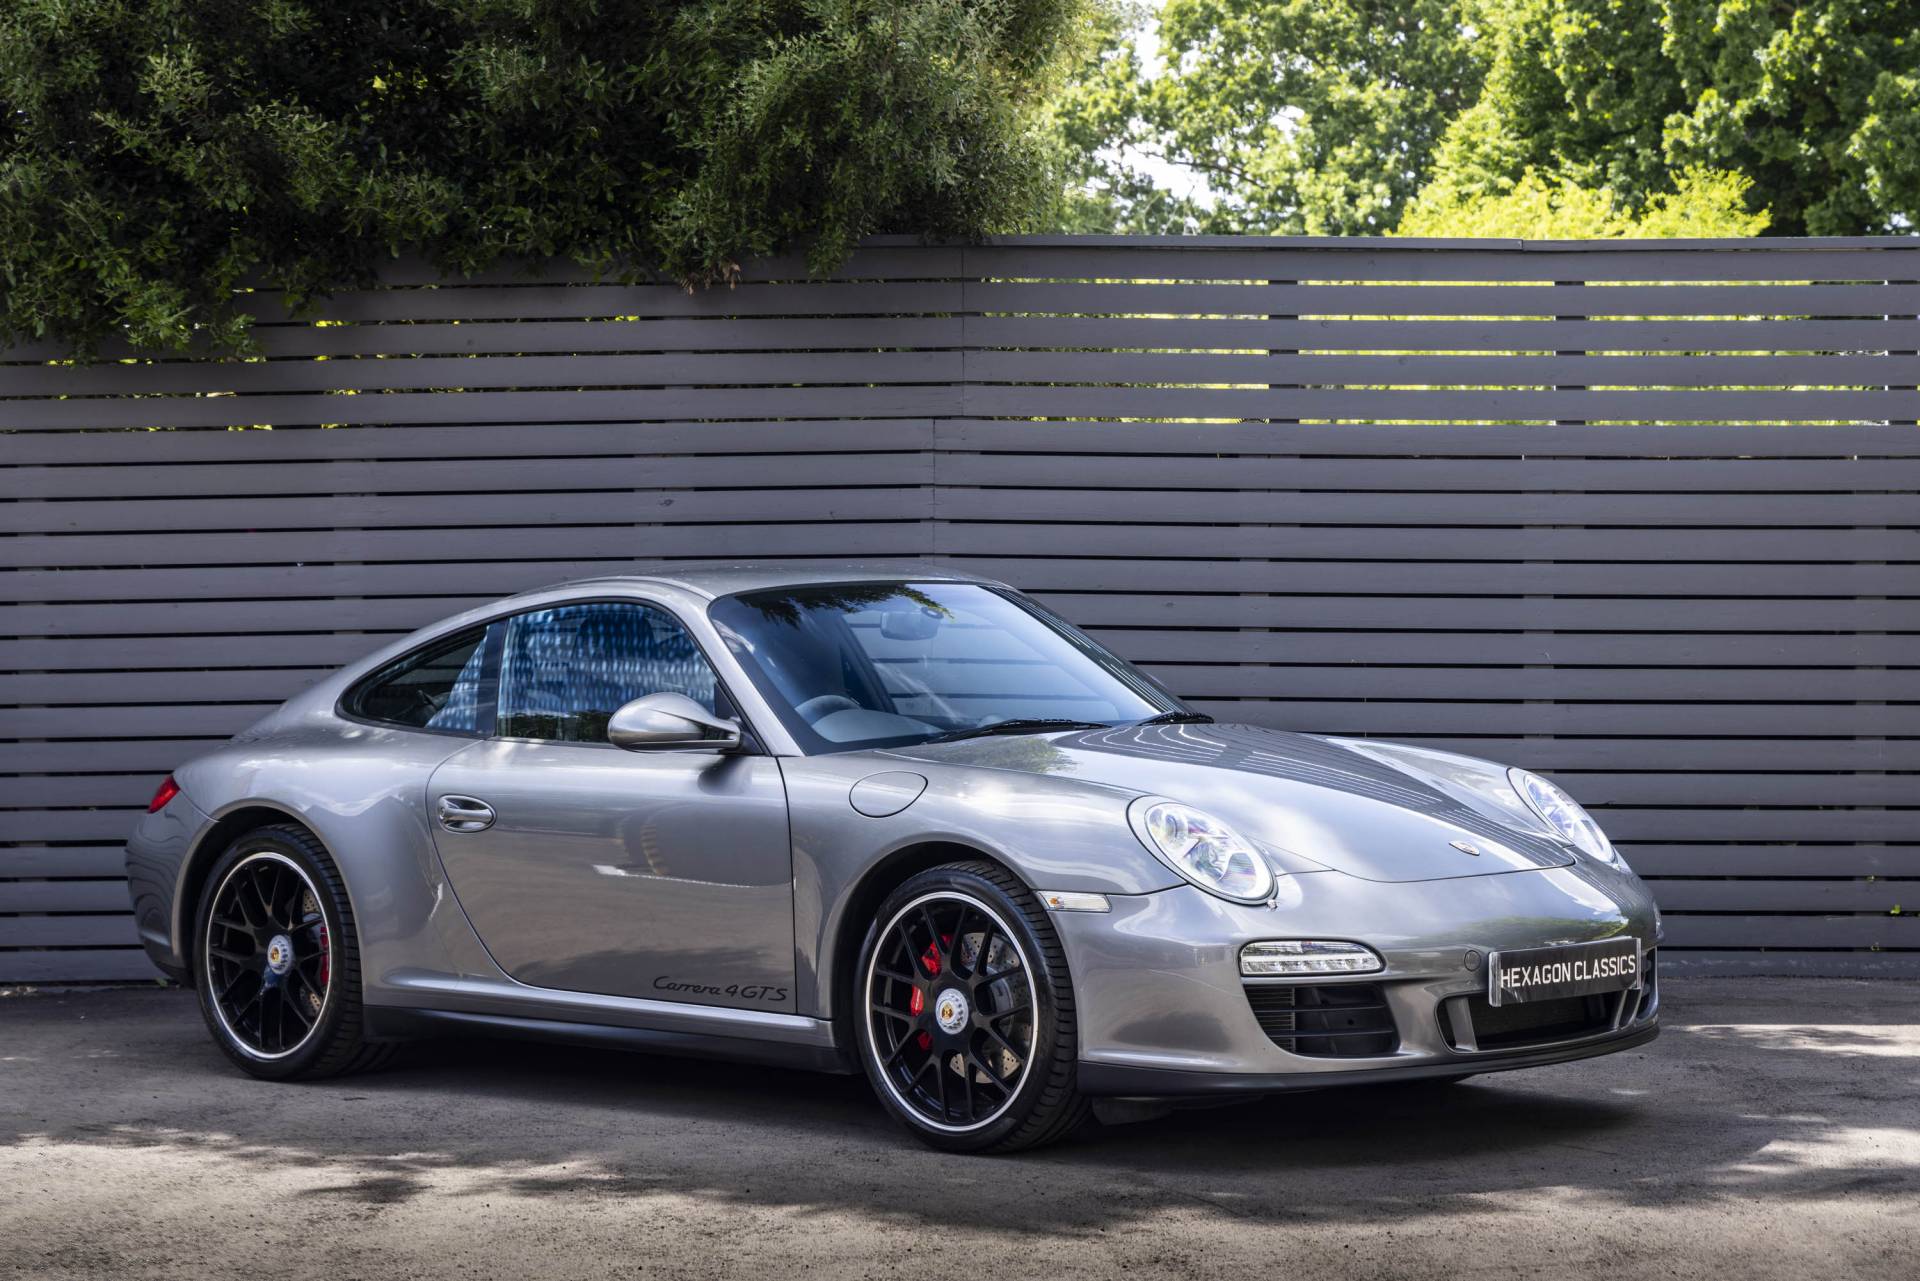 For Sale: Porsche 911 Carrera 4 GTS (2011) offered for $151,808